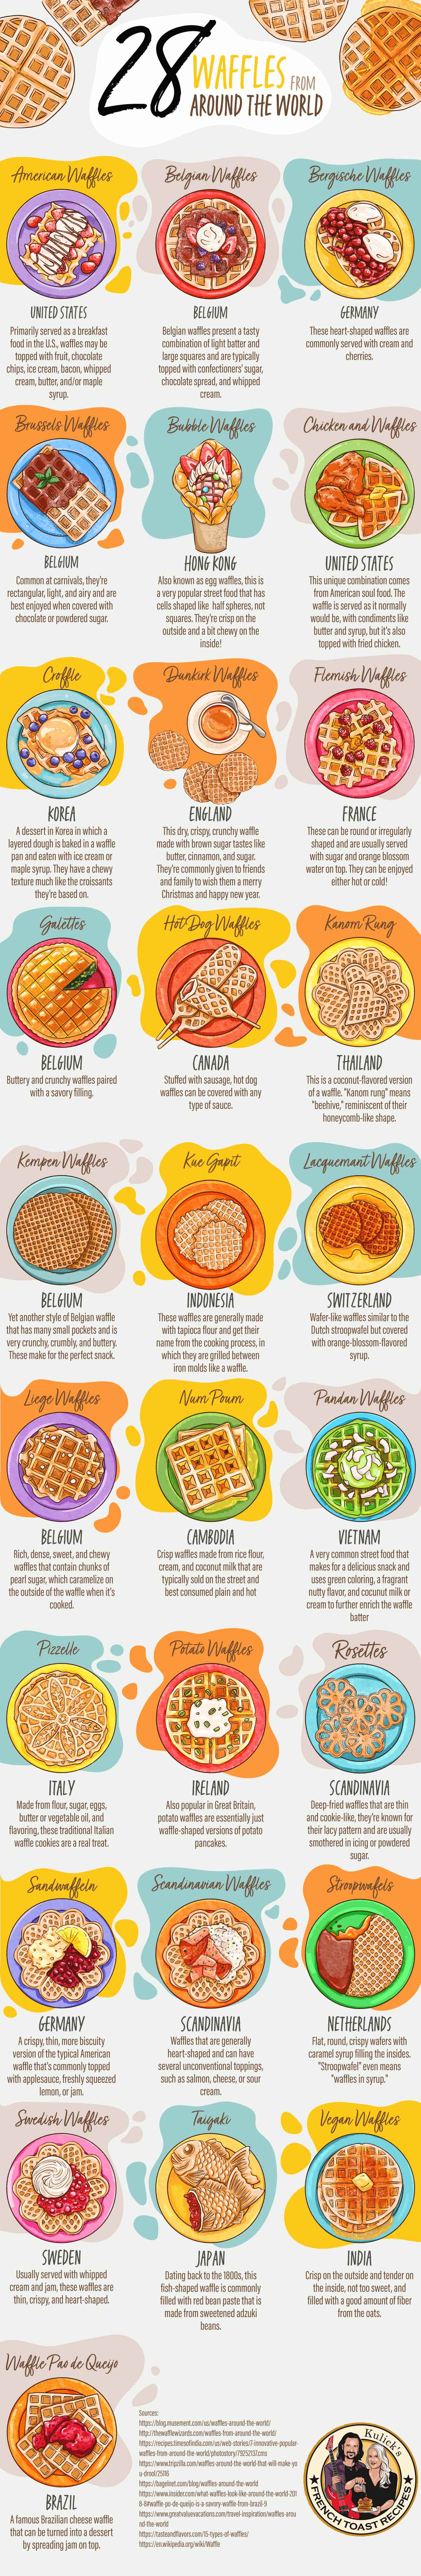 28 Waffles From Around the World (Infographic)